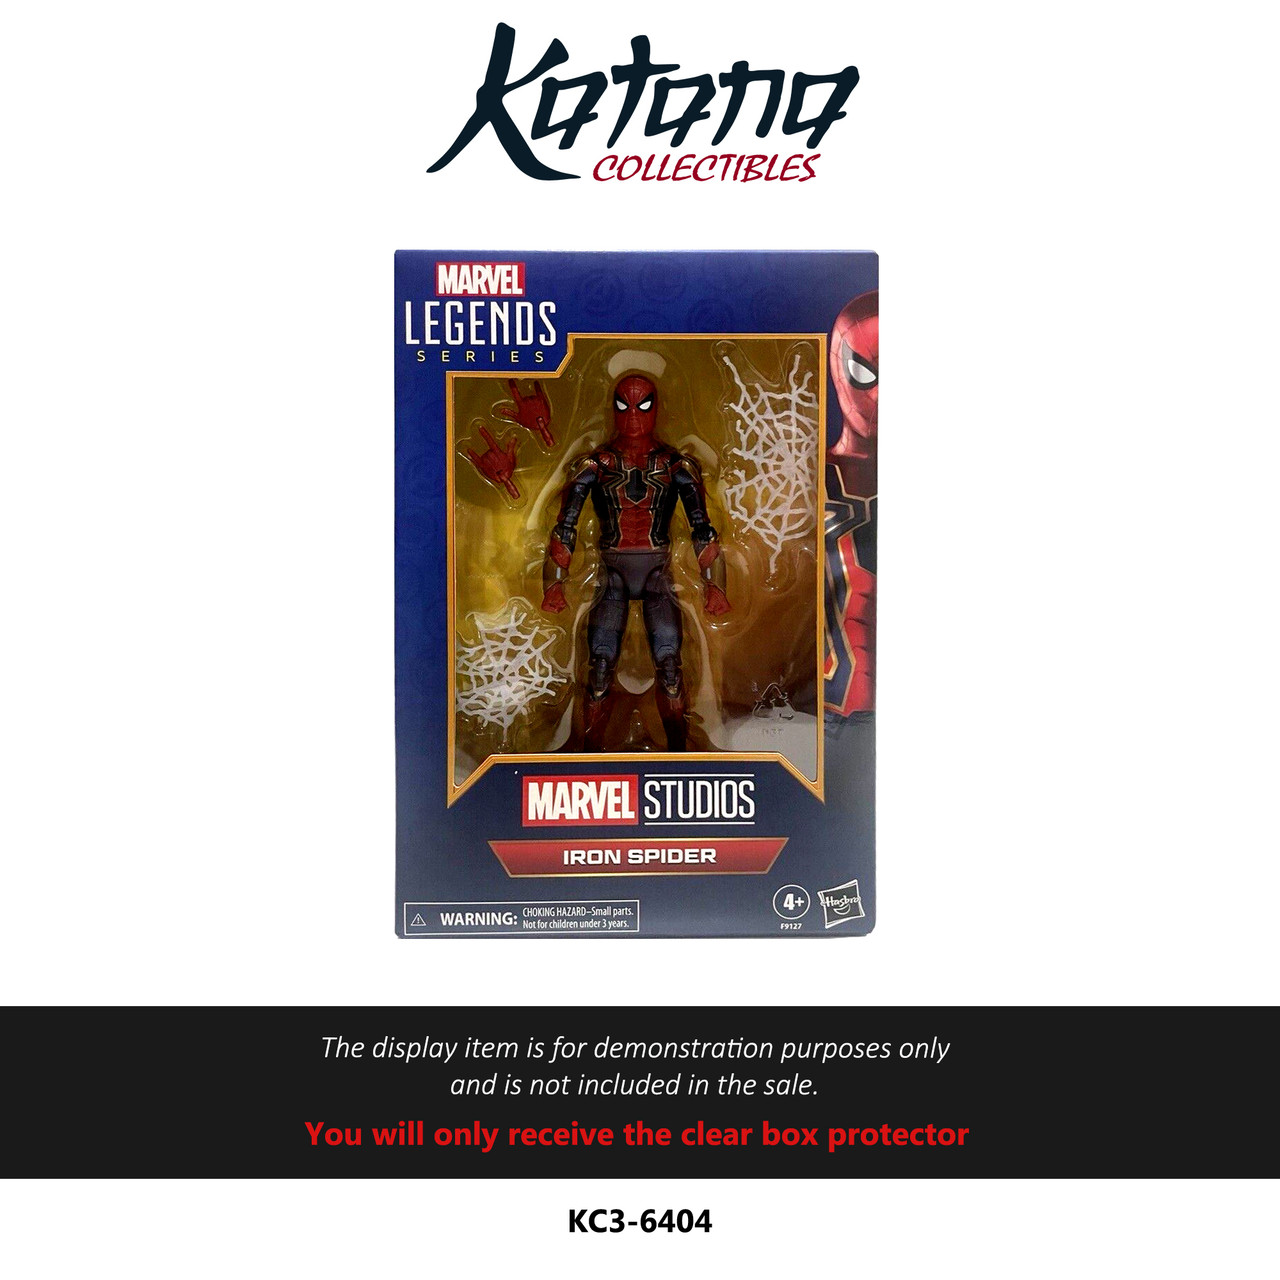 Katana Collectibles Protector For Marvel Legends Series - Marvel Studios Iron Spider